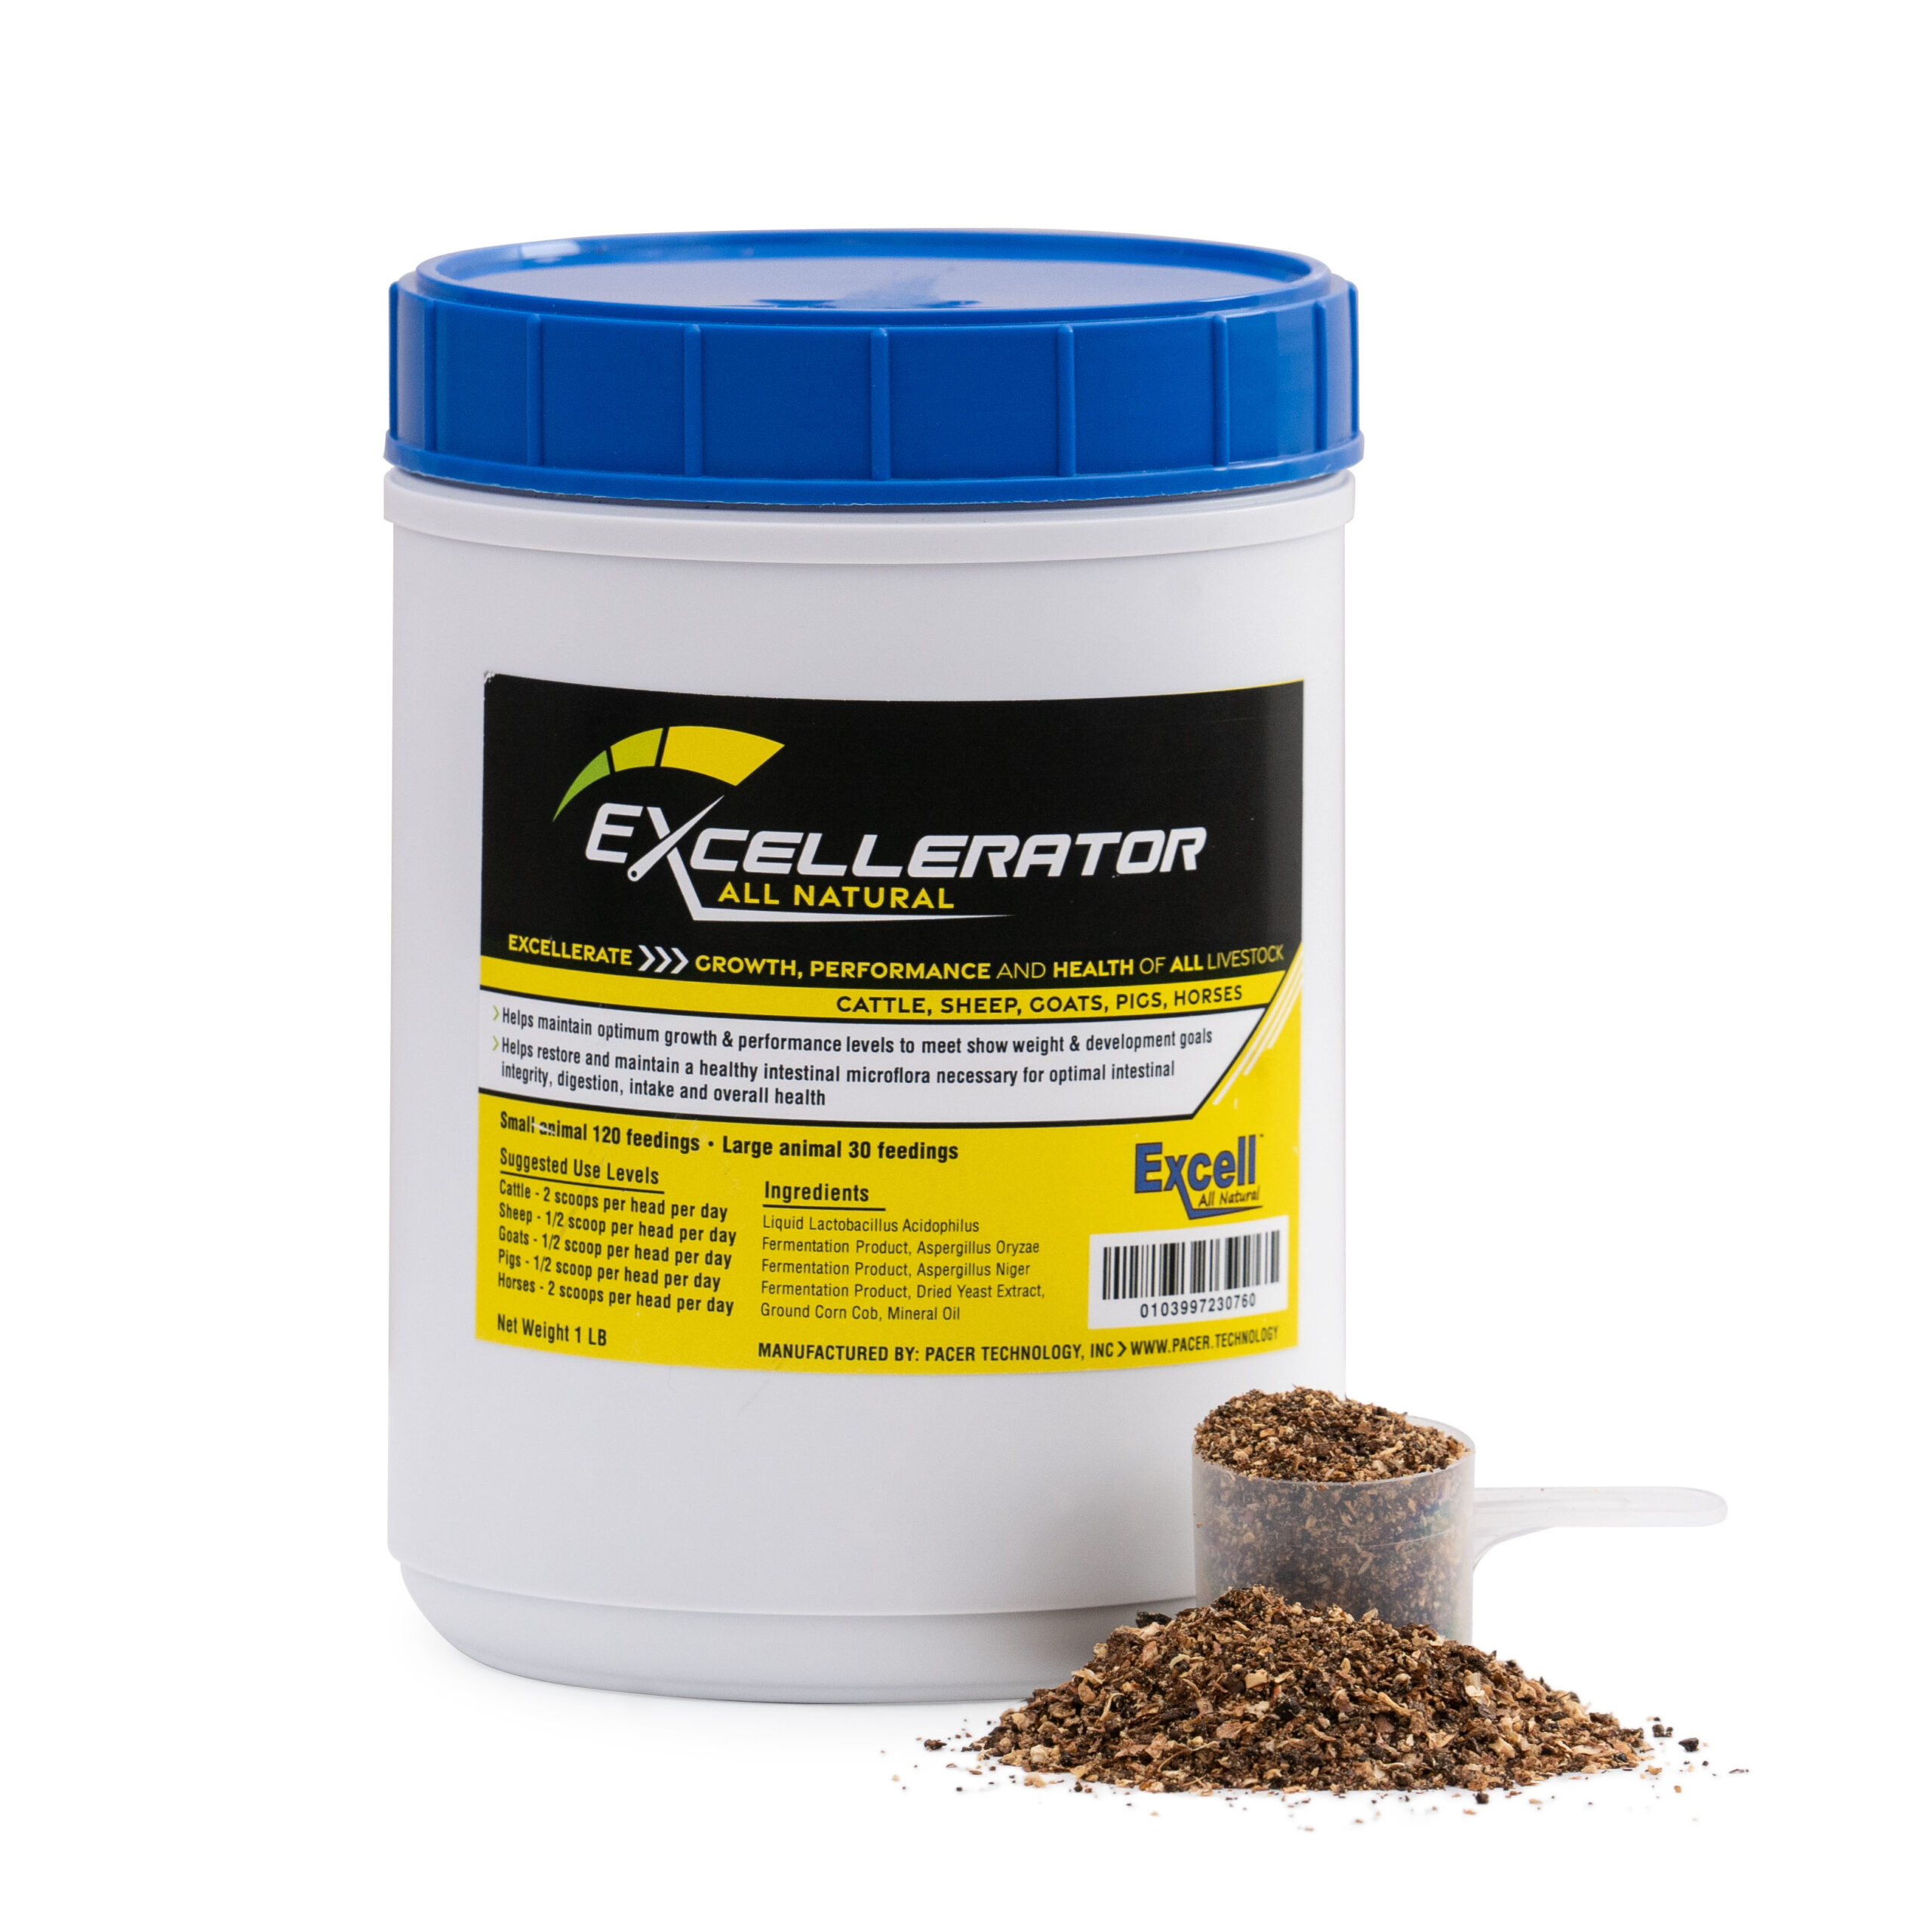 Featured image for “EXCELLERATOR ALL NATURAL <br />(1 LBS)”